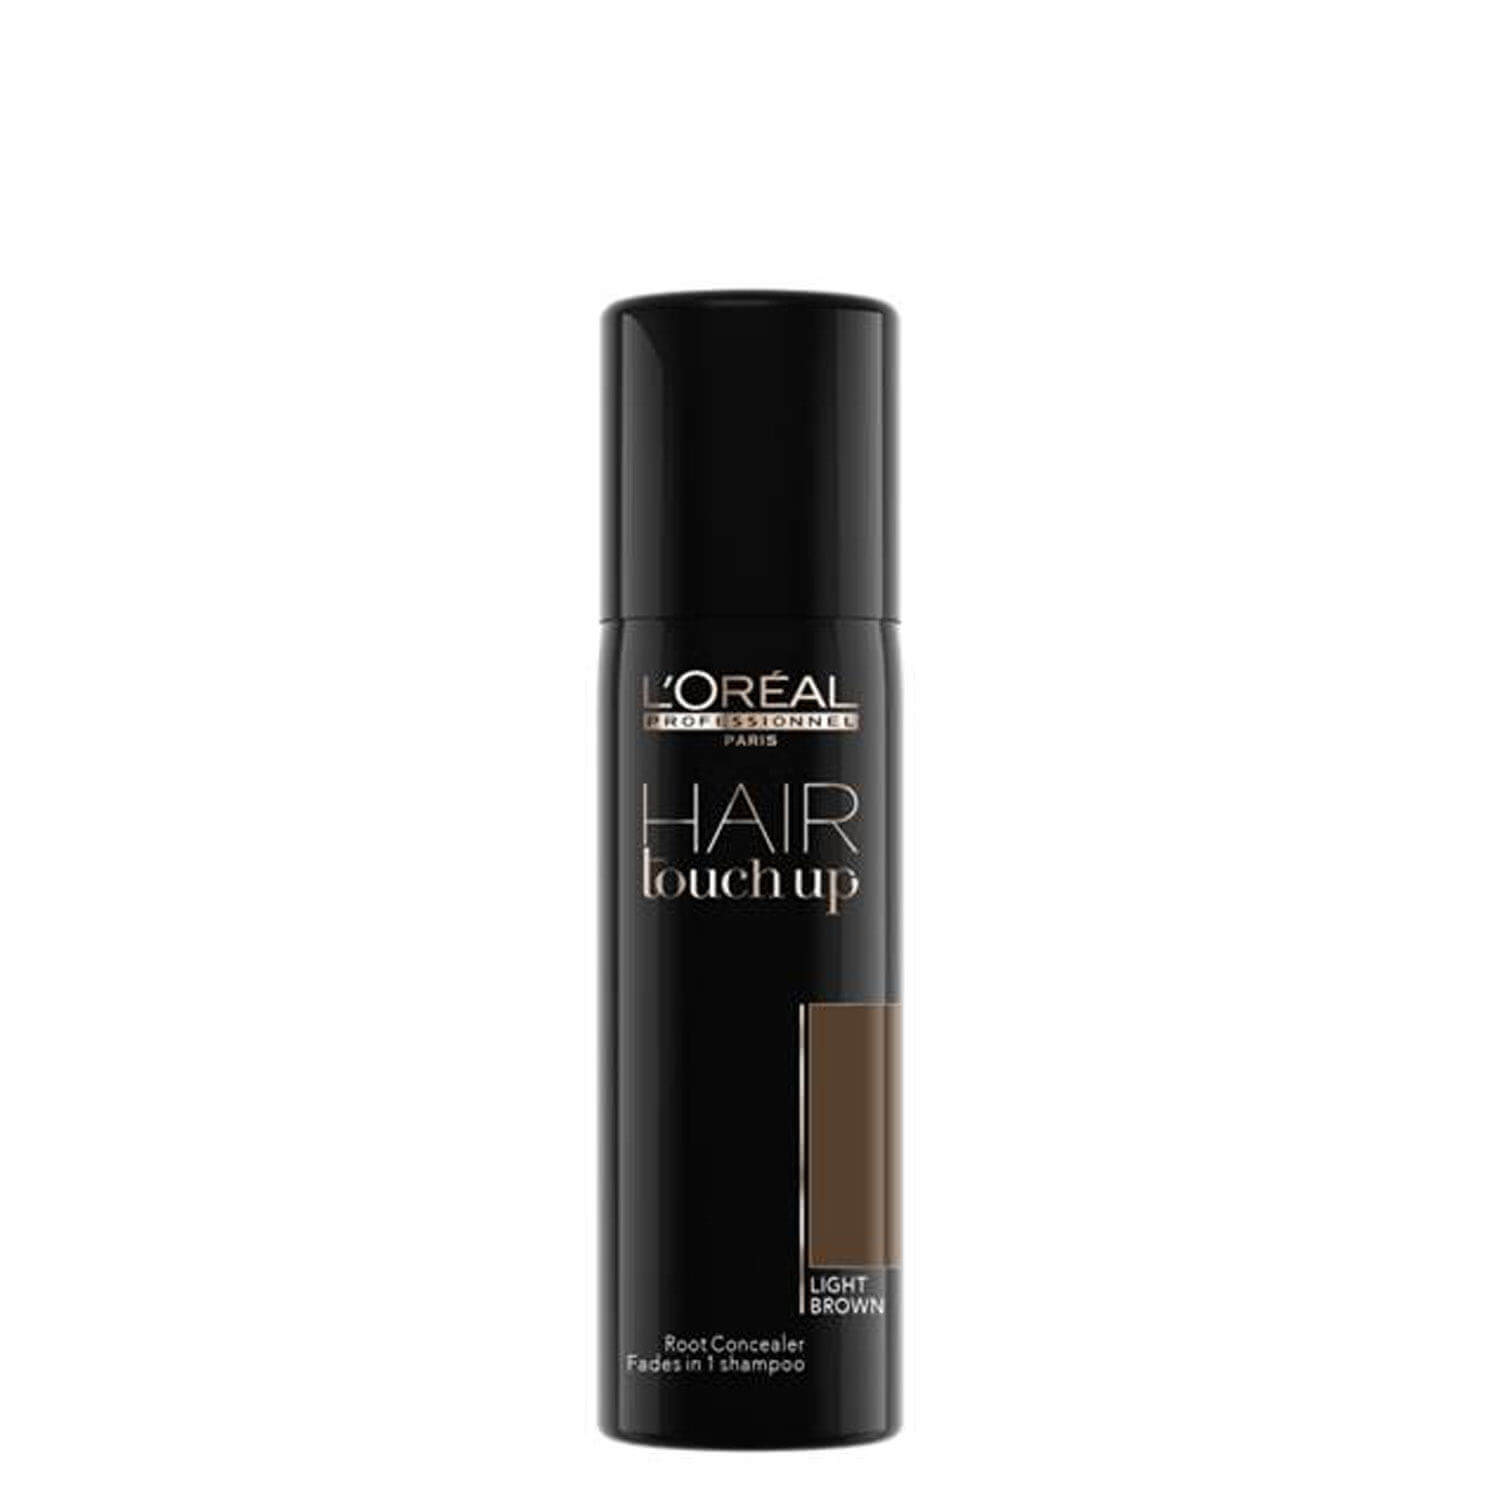 L'Oreal Hair Touch Up Light Brown 25592